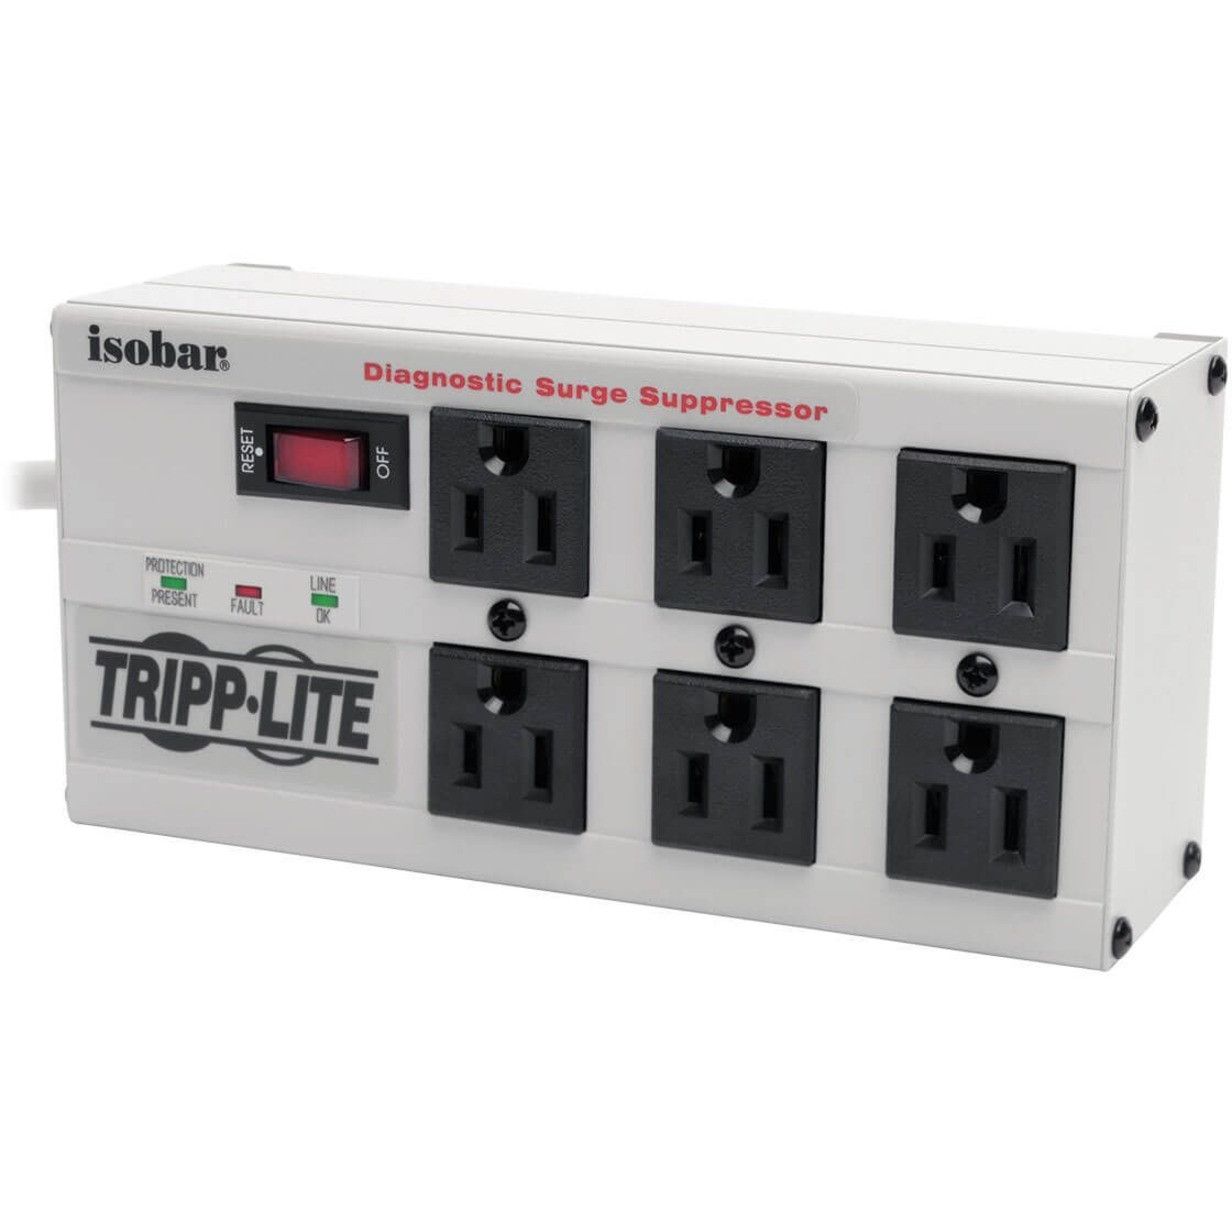 Tripp Lite Isobar Surge Protector Strip Metal 6 Outlet 6′ Cord 3330 Joules6 x NEMA 5-15R2350 J120 V AC Input120 V AC OutputCable… IBAR6-6D